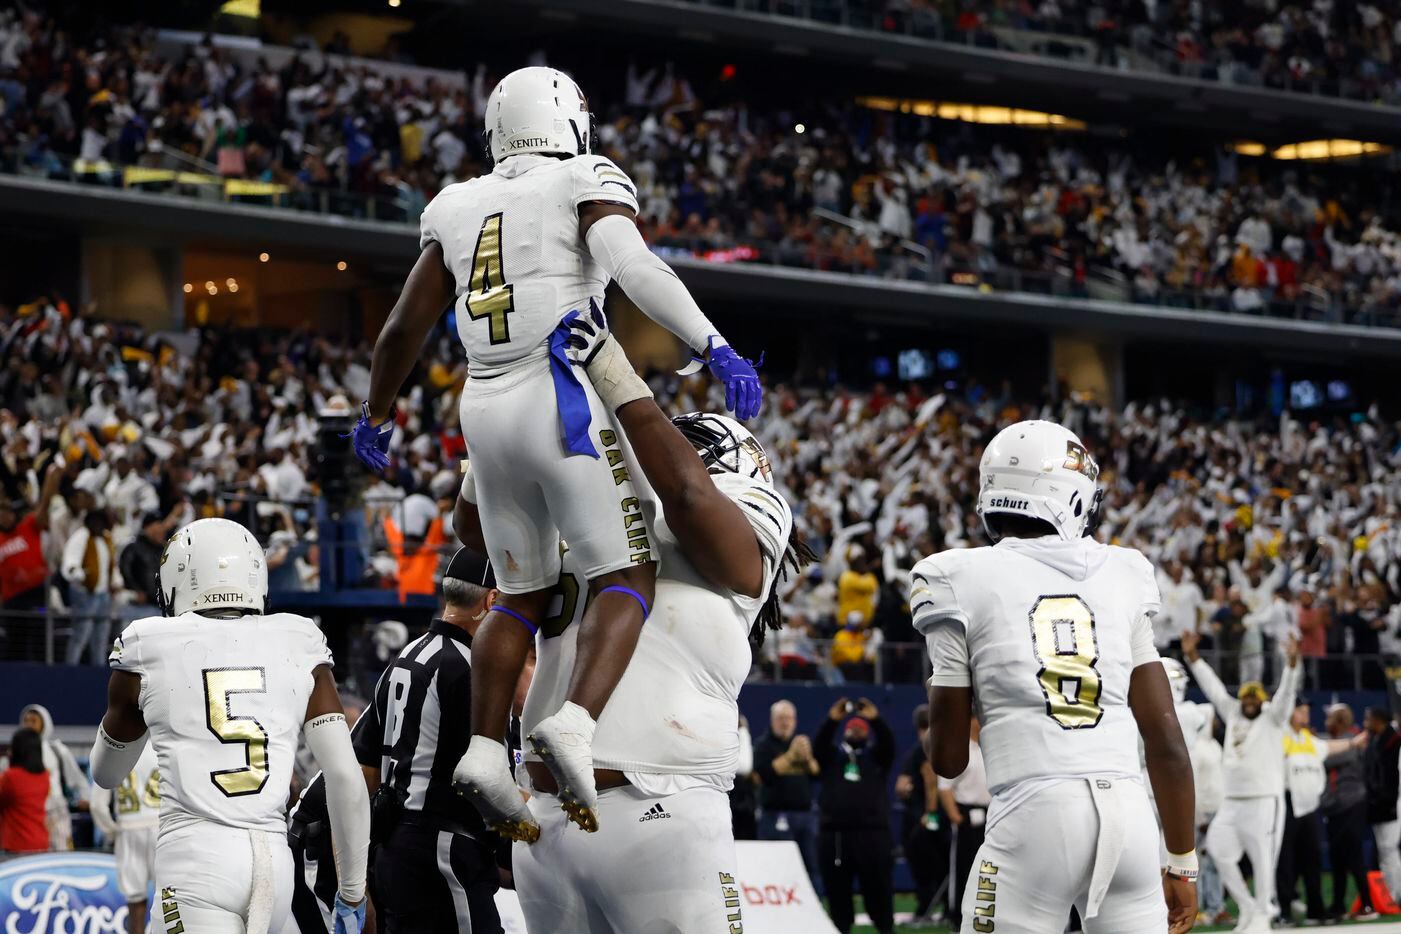 South Oak Cliff offensive lineman Brione Ramsey-Brooks (58) lifts South Oak Cliff running back Qualon Farrar (4) into the air after Farrar scored a touchdown during the fourth quarter of their Class 5A Division II state championship game against Liberty Hill at AT&T Stadium in Arlington, Saturday, Dec. 18, 2021. South Oak Cliff defeated Liberty Hill 23-14 for Dallas ISD’s first title since 1958. (Elias Valverde II/The Dallas Morning News)